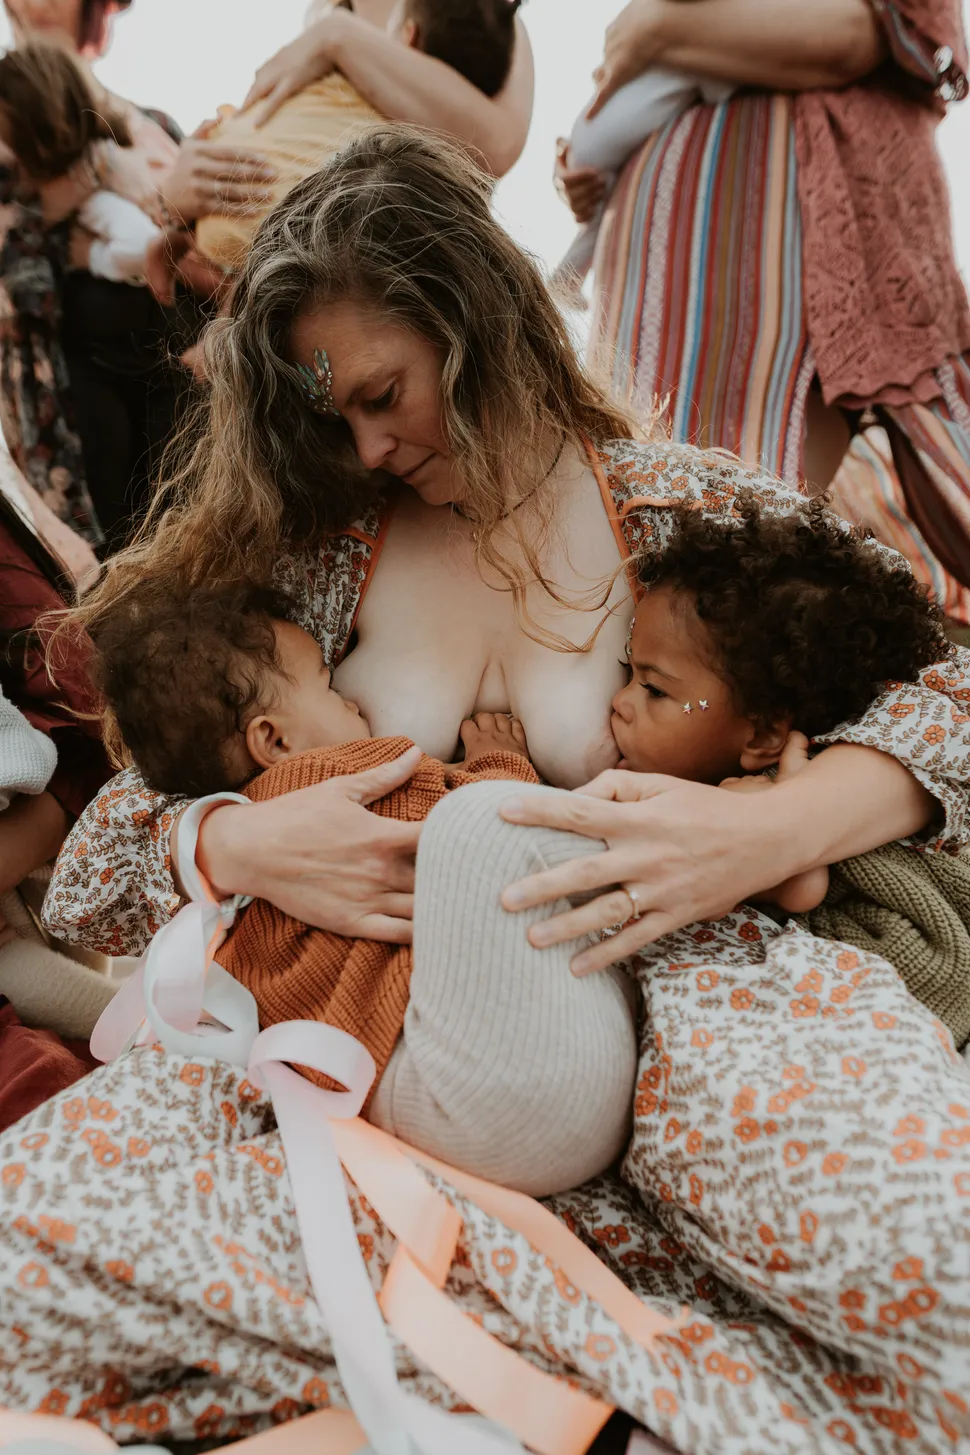 5 Powerful Photos Of Mums Breastfeeding – And The Stories Behind Them